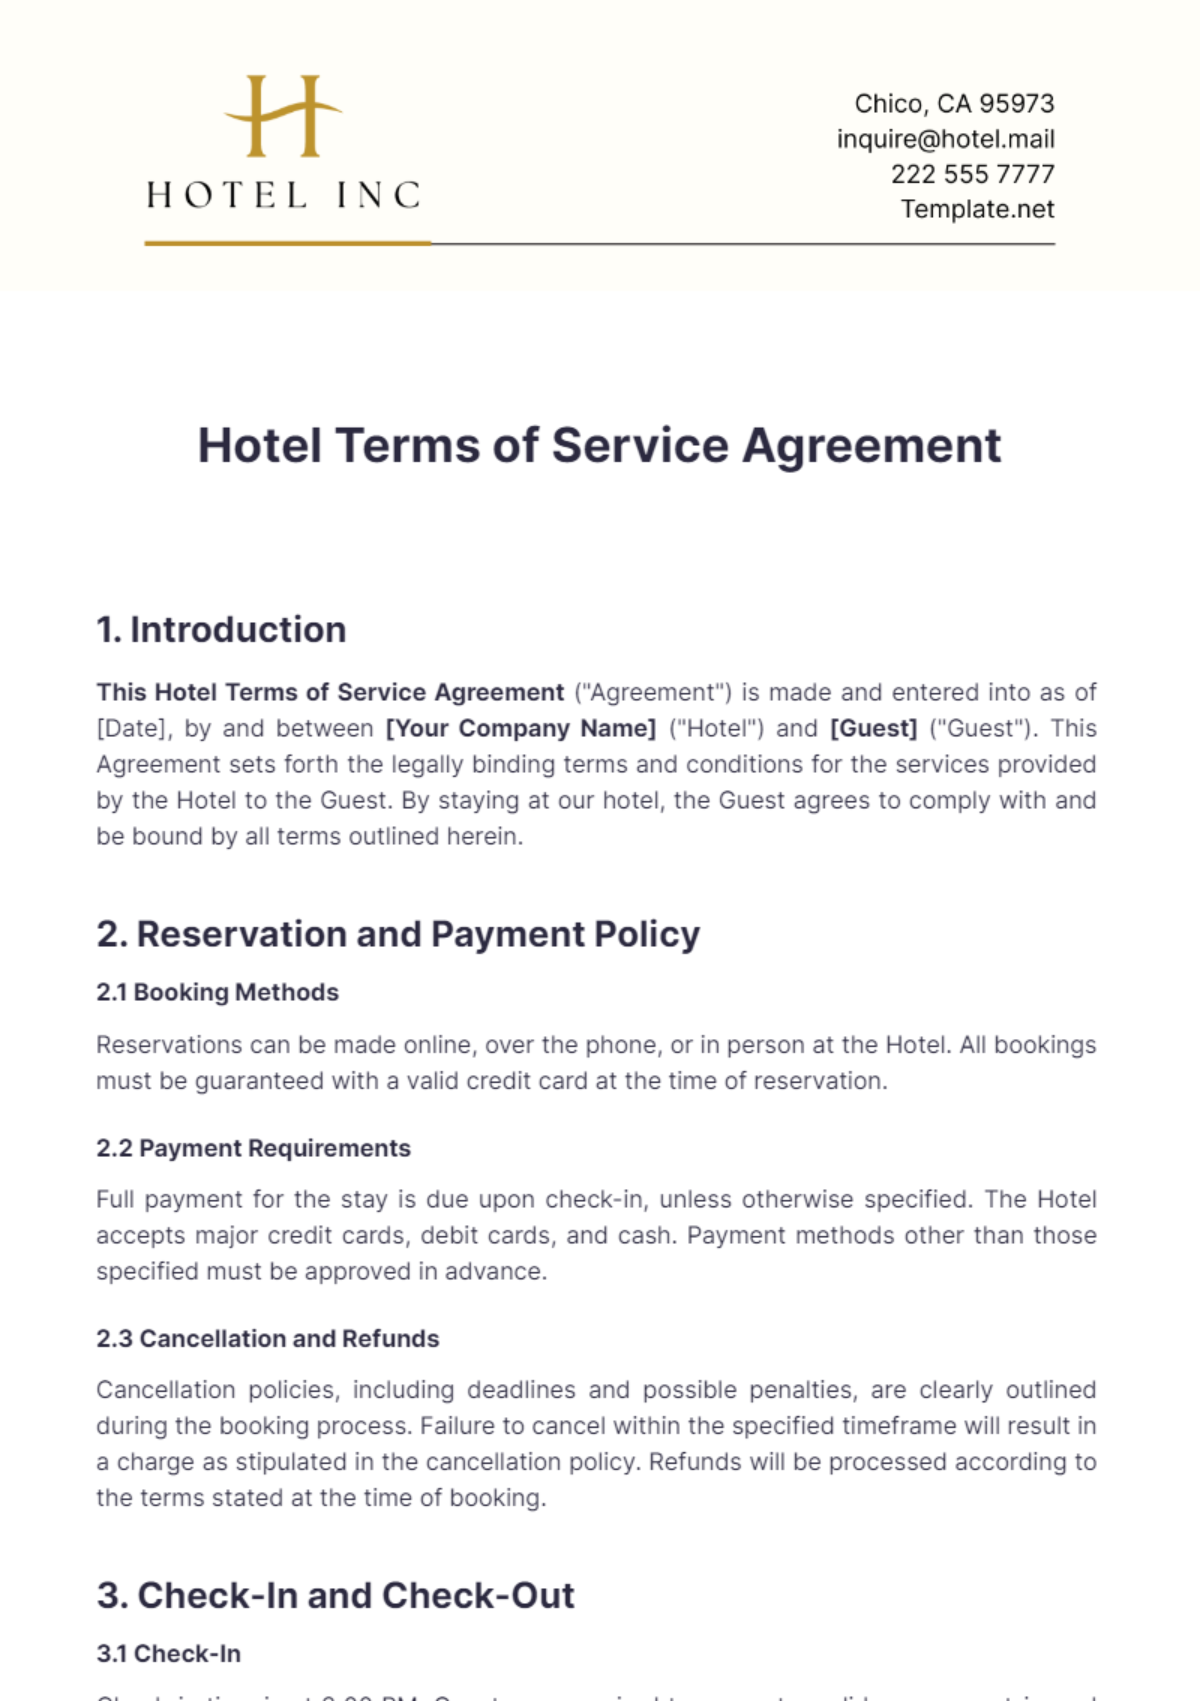 Hotel Terms of Service Agreement Template